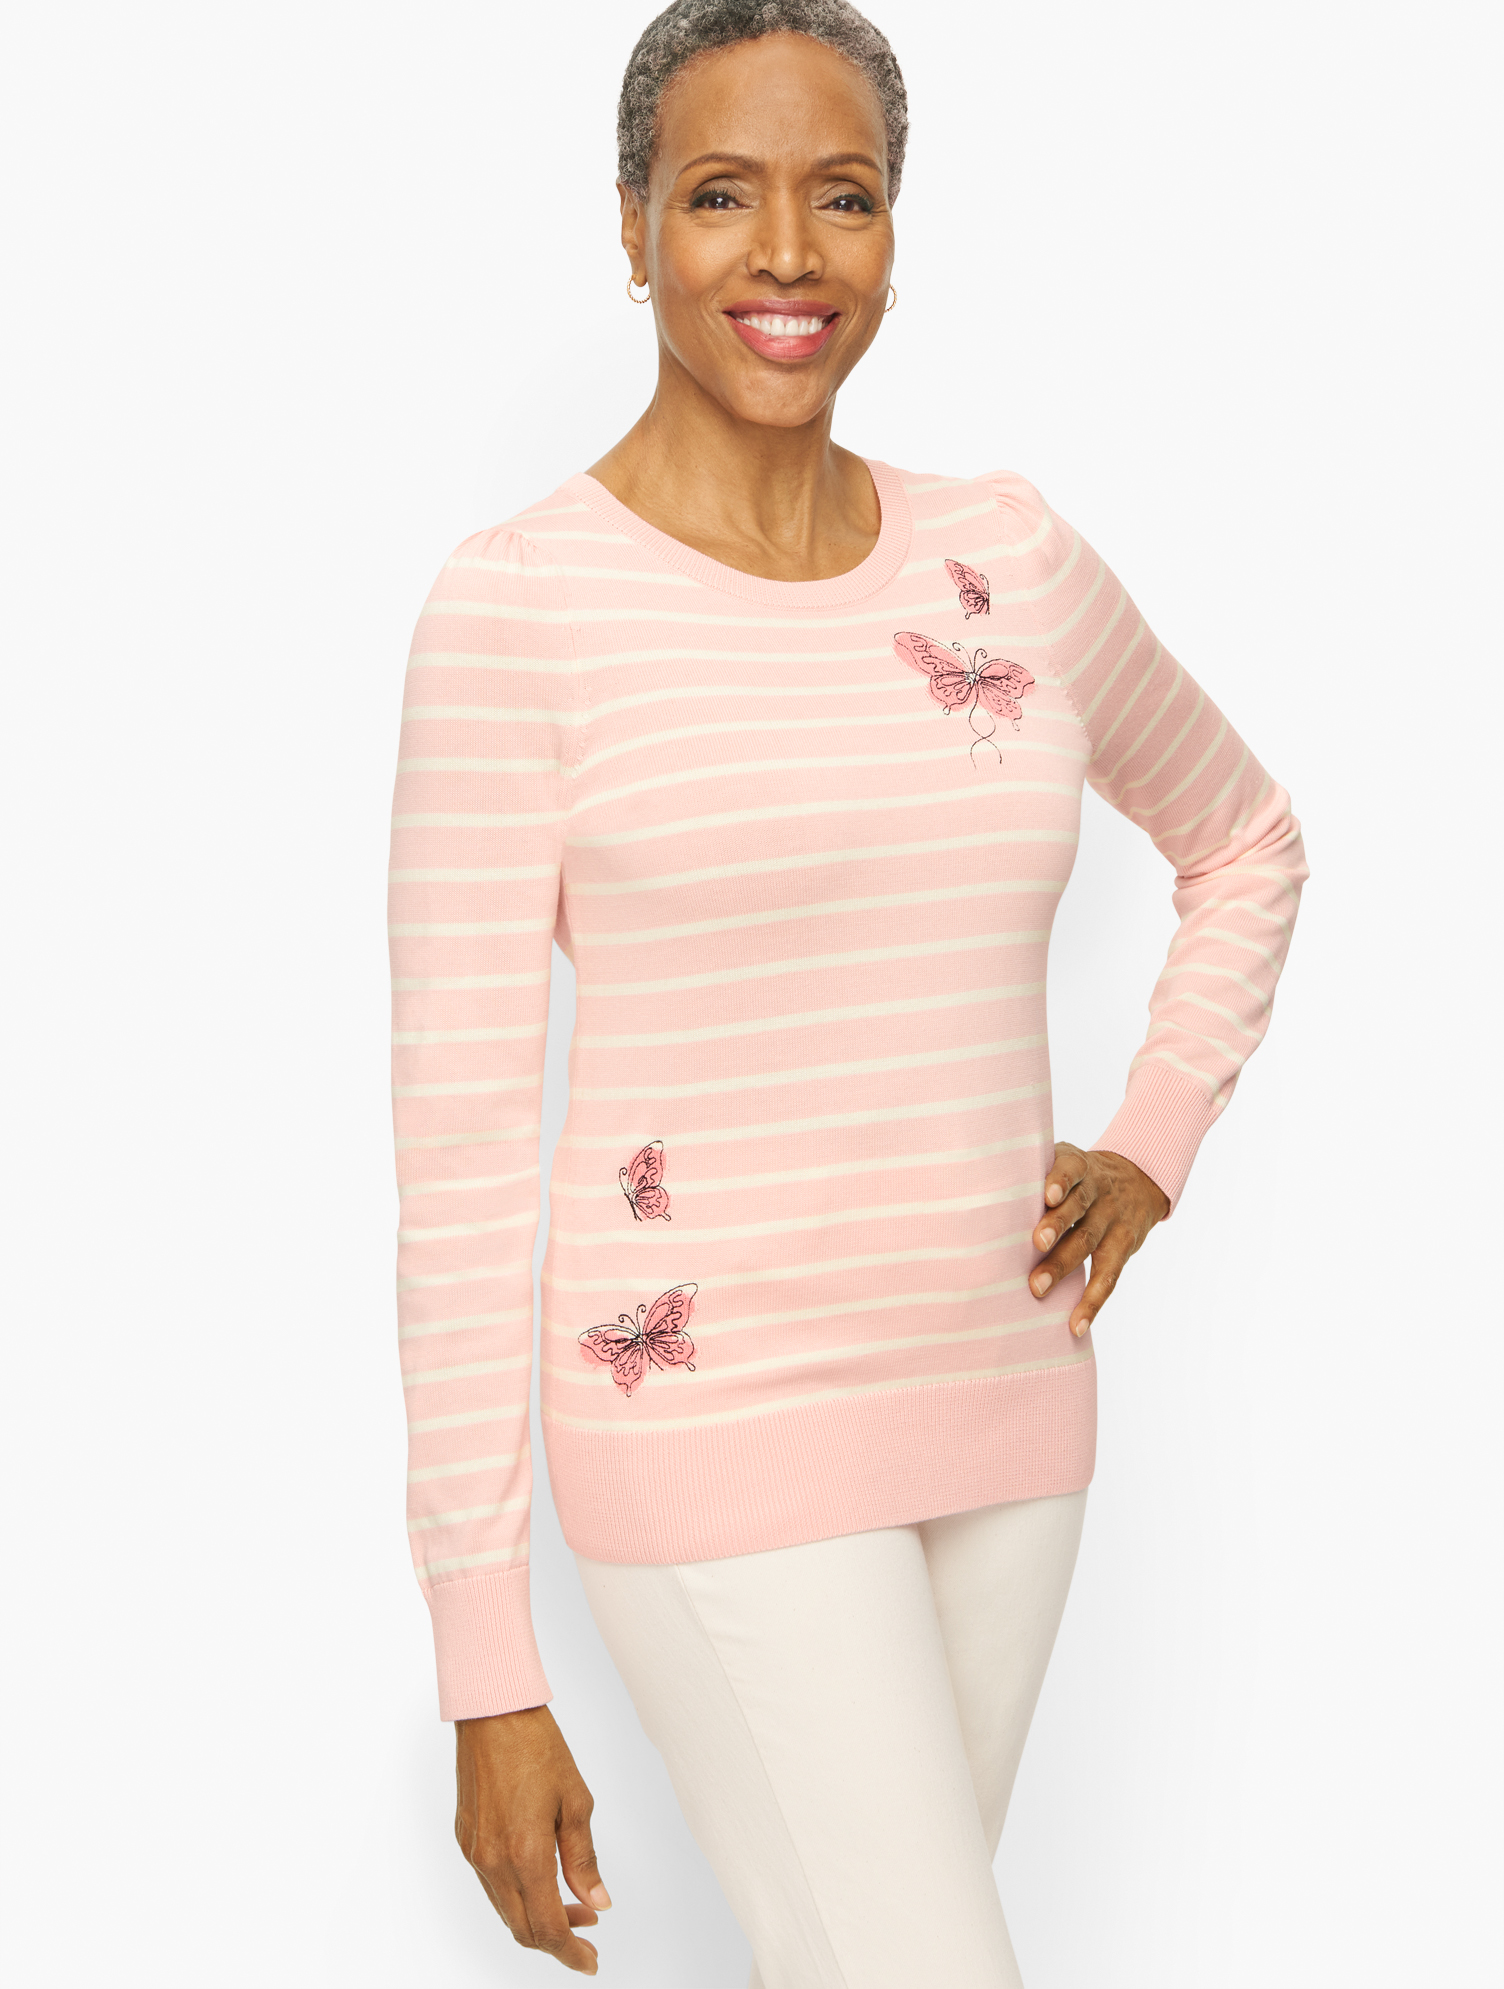 Talbots Plus Size - Crewneck Sweater - Embroidered Butterfly Stripe - Caspian Pink/ivory - X  In Caspian Pink,ivory